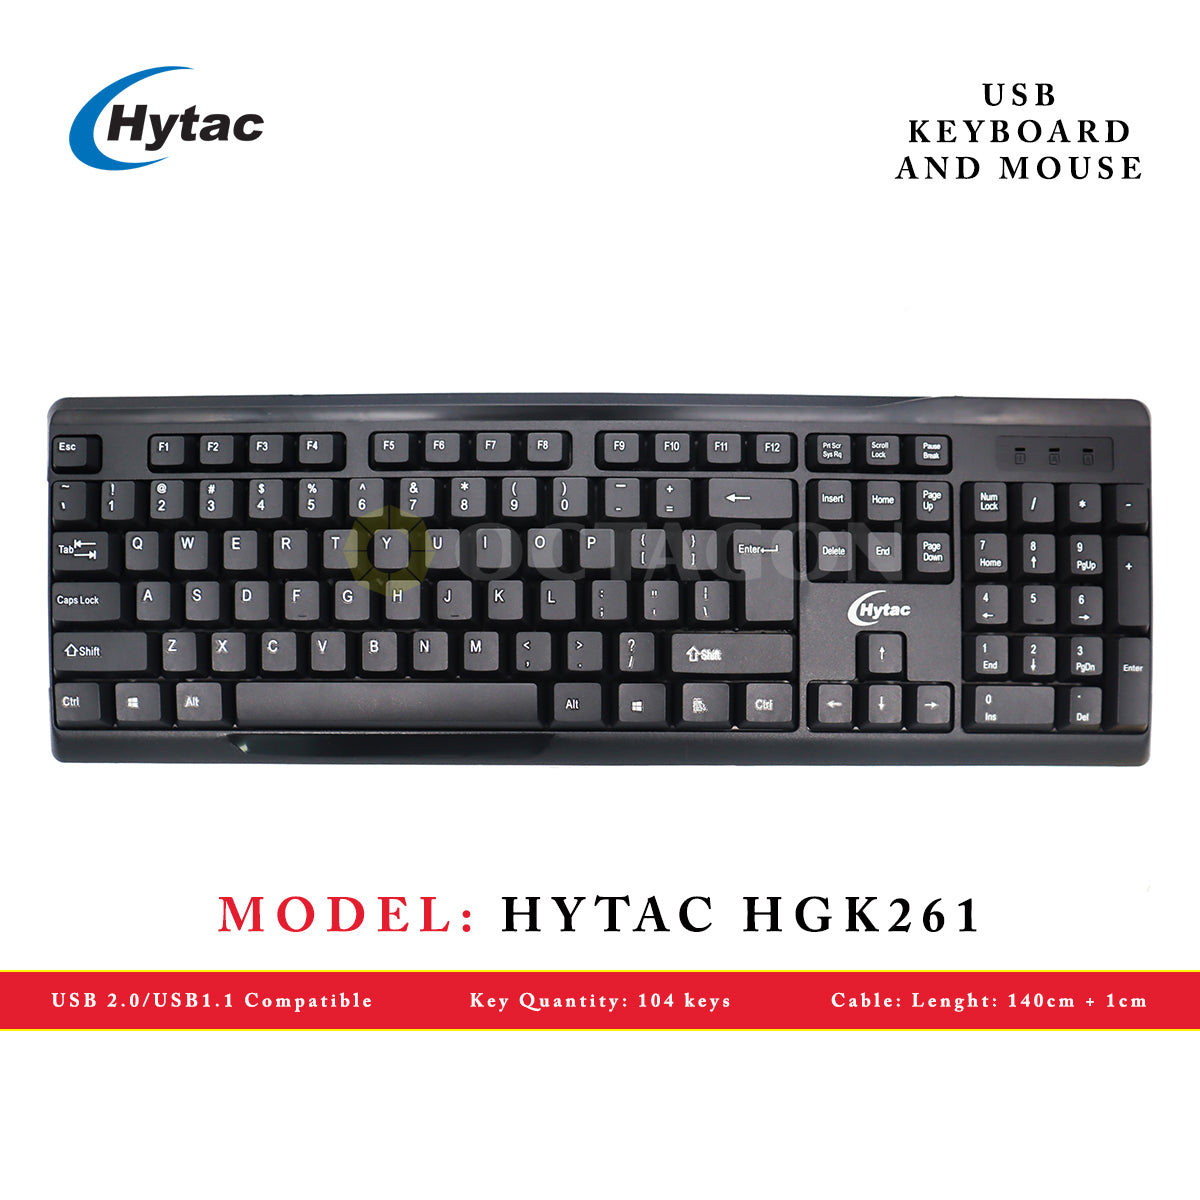 HYTAC HGK261 USB KEYBOARD AND MOUSE